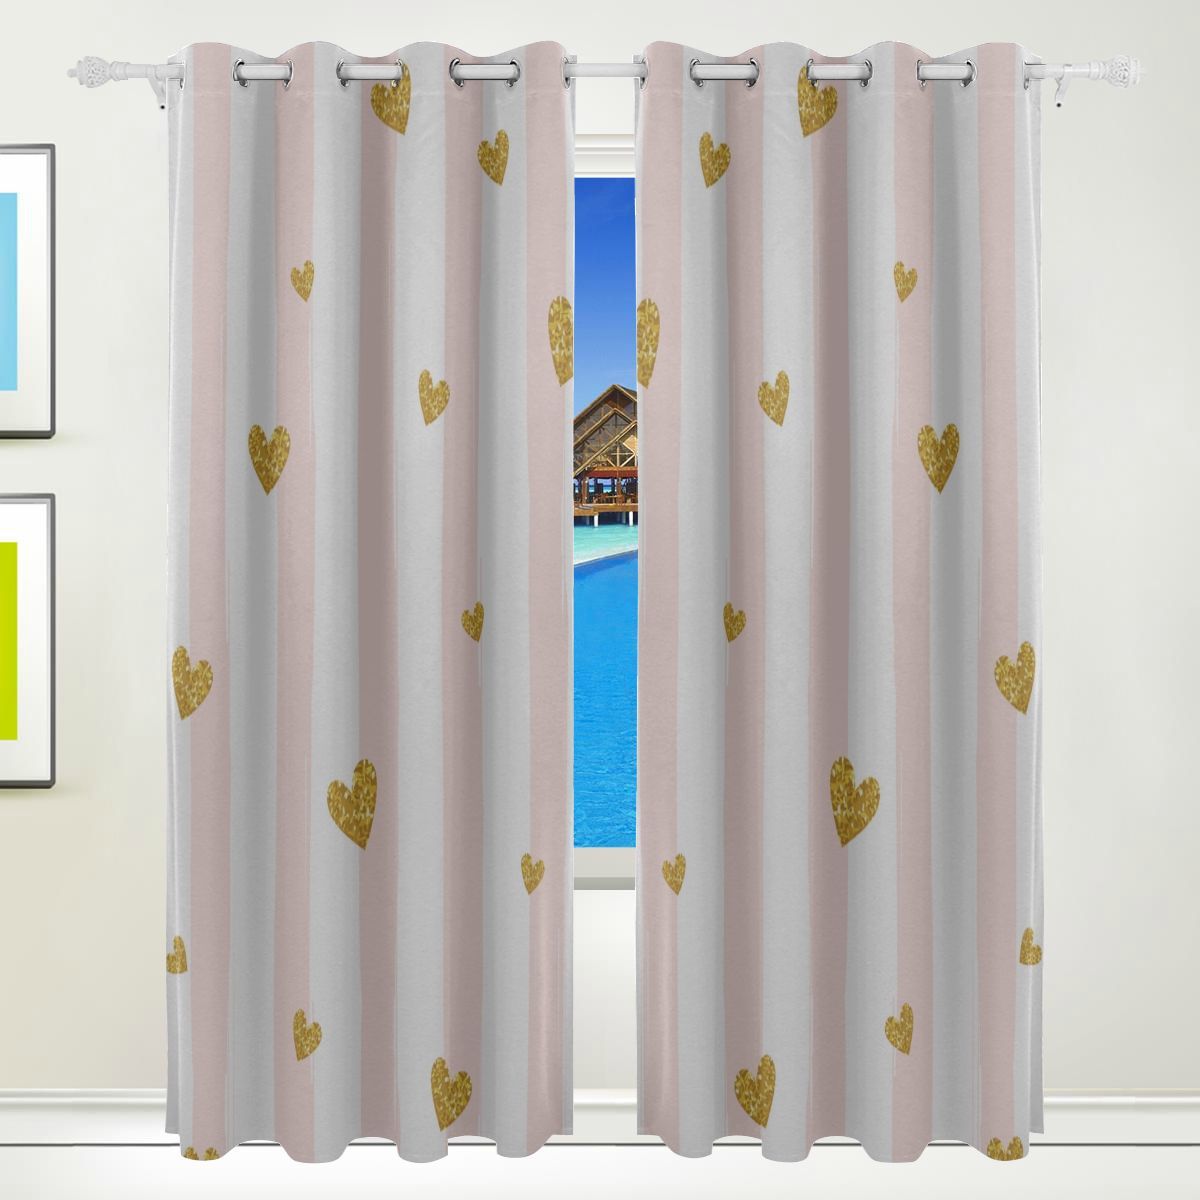 Panel Bedroom Curtains Glitter Confetti With Stripe Print Cool Curtains ...